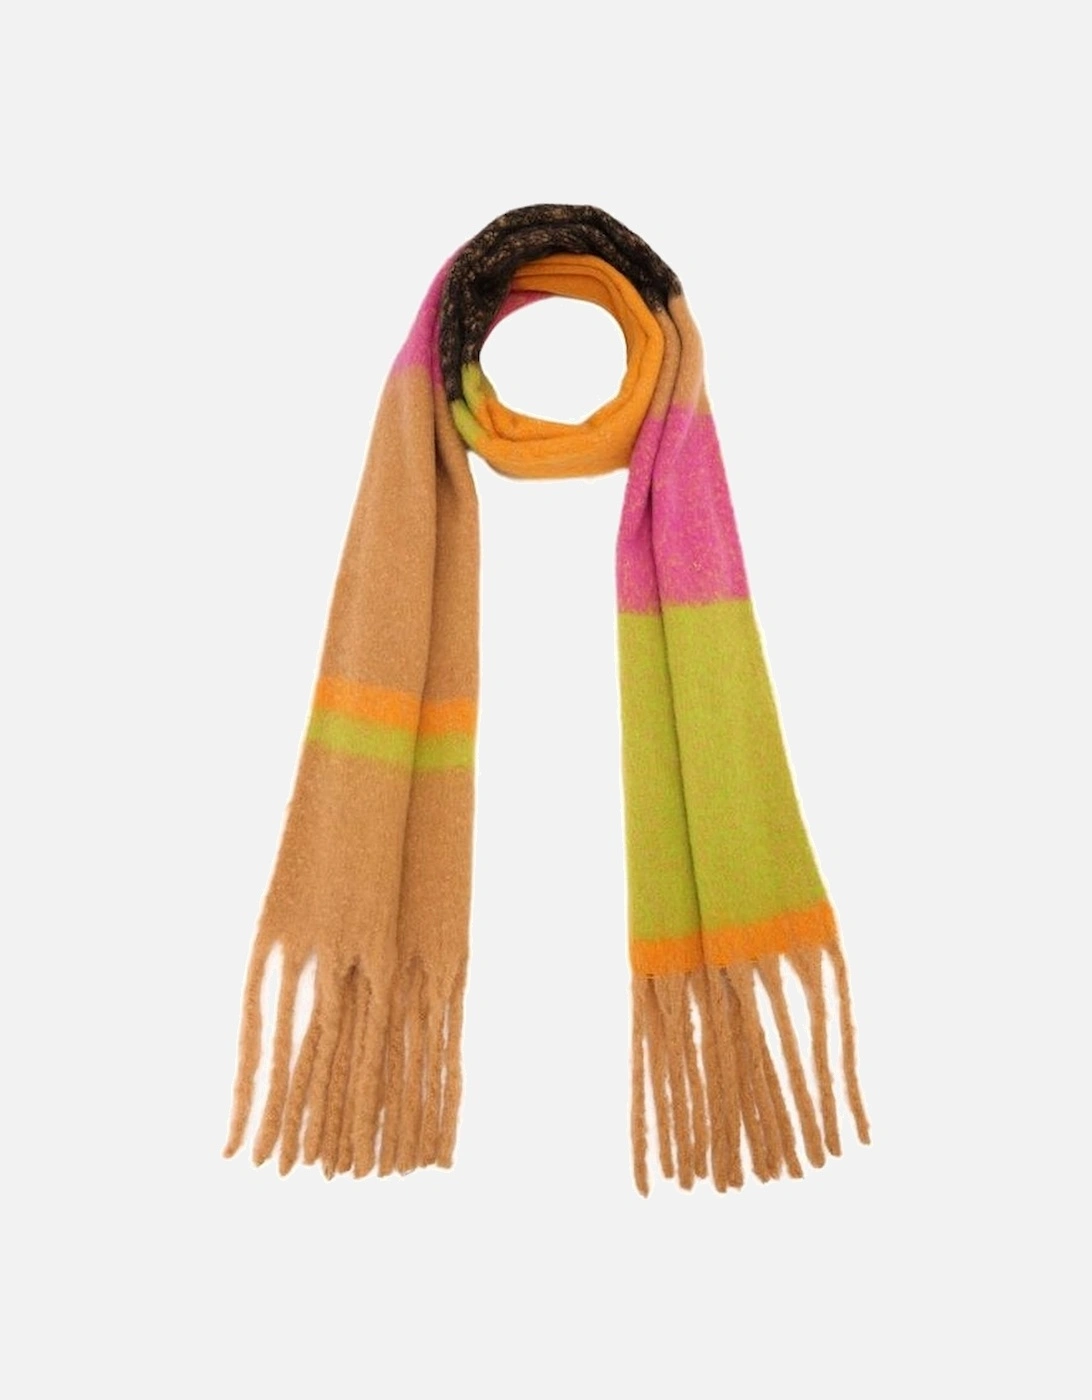 Cashmere Oversized Striped Scarf in Multi Tones, 2 of 1